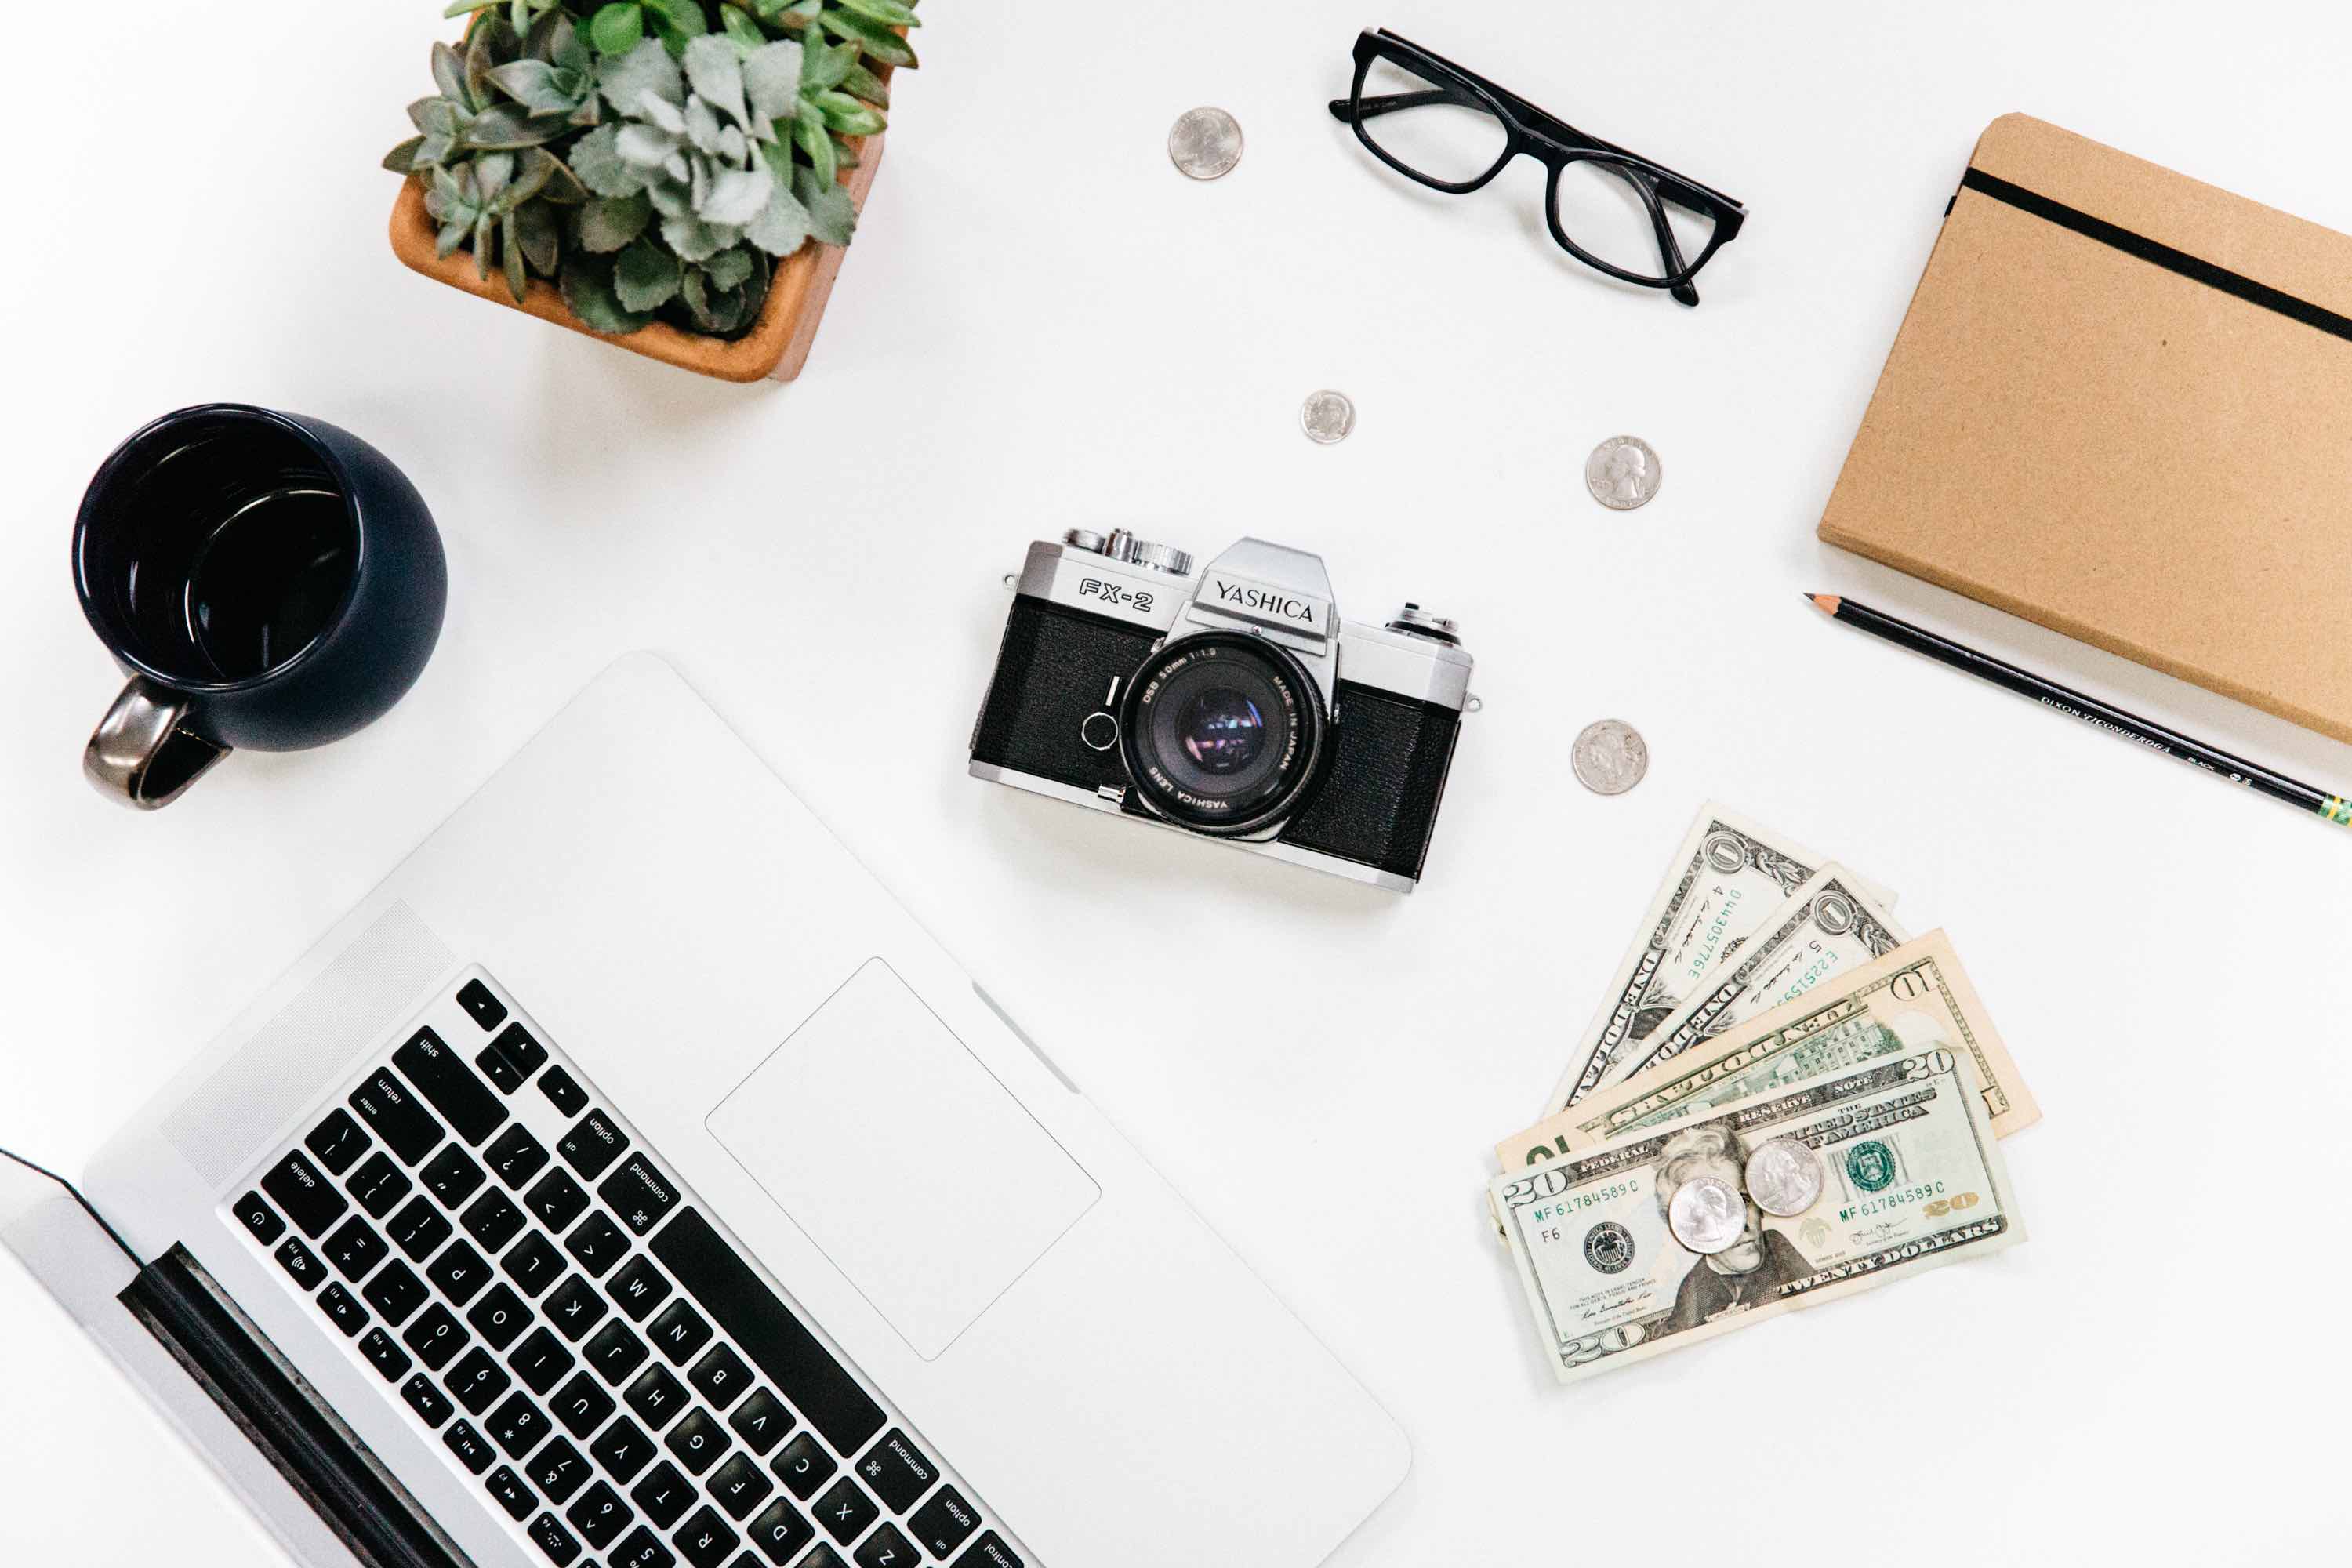 a Camera, glasses, coins, laptop, succulent, coffee mug, and notebook on a white background